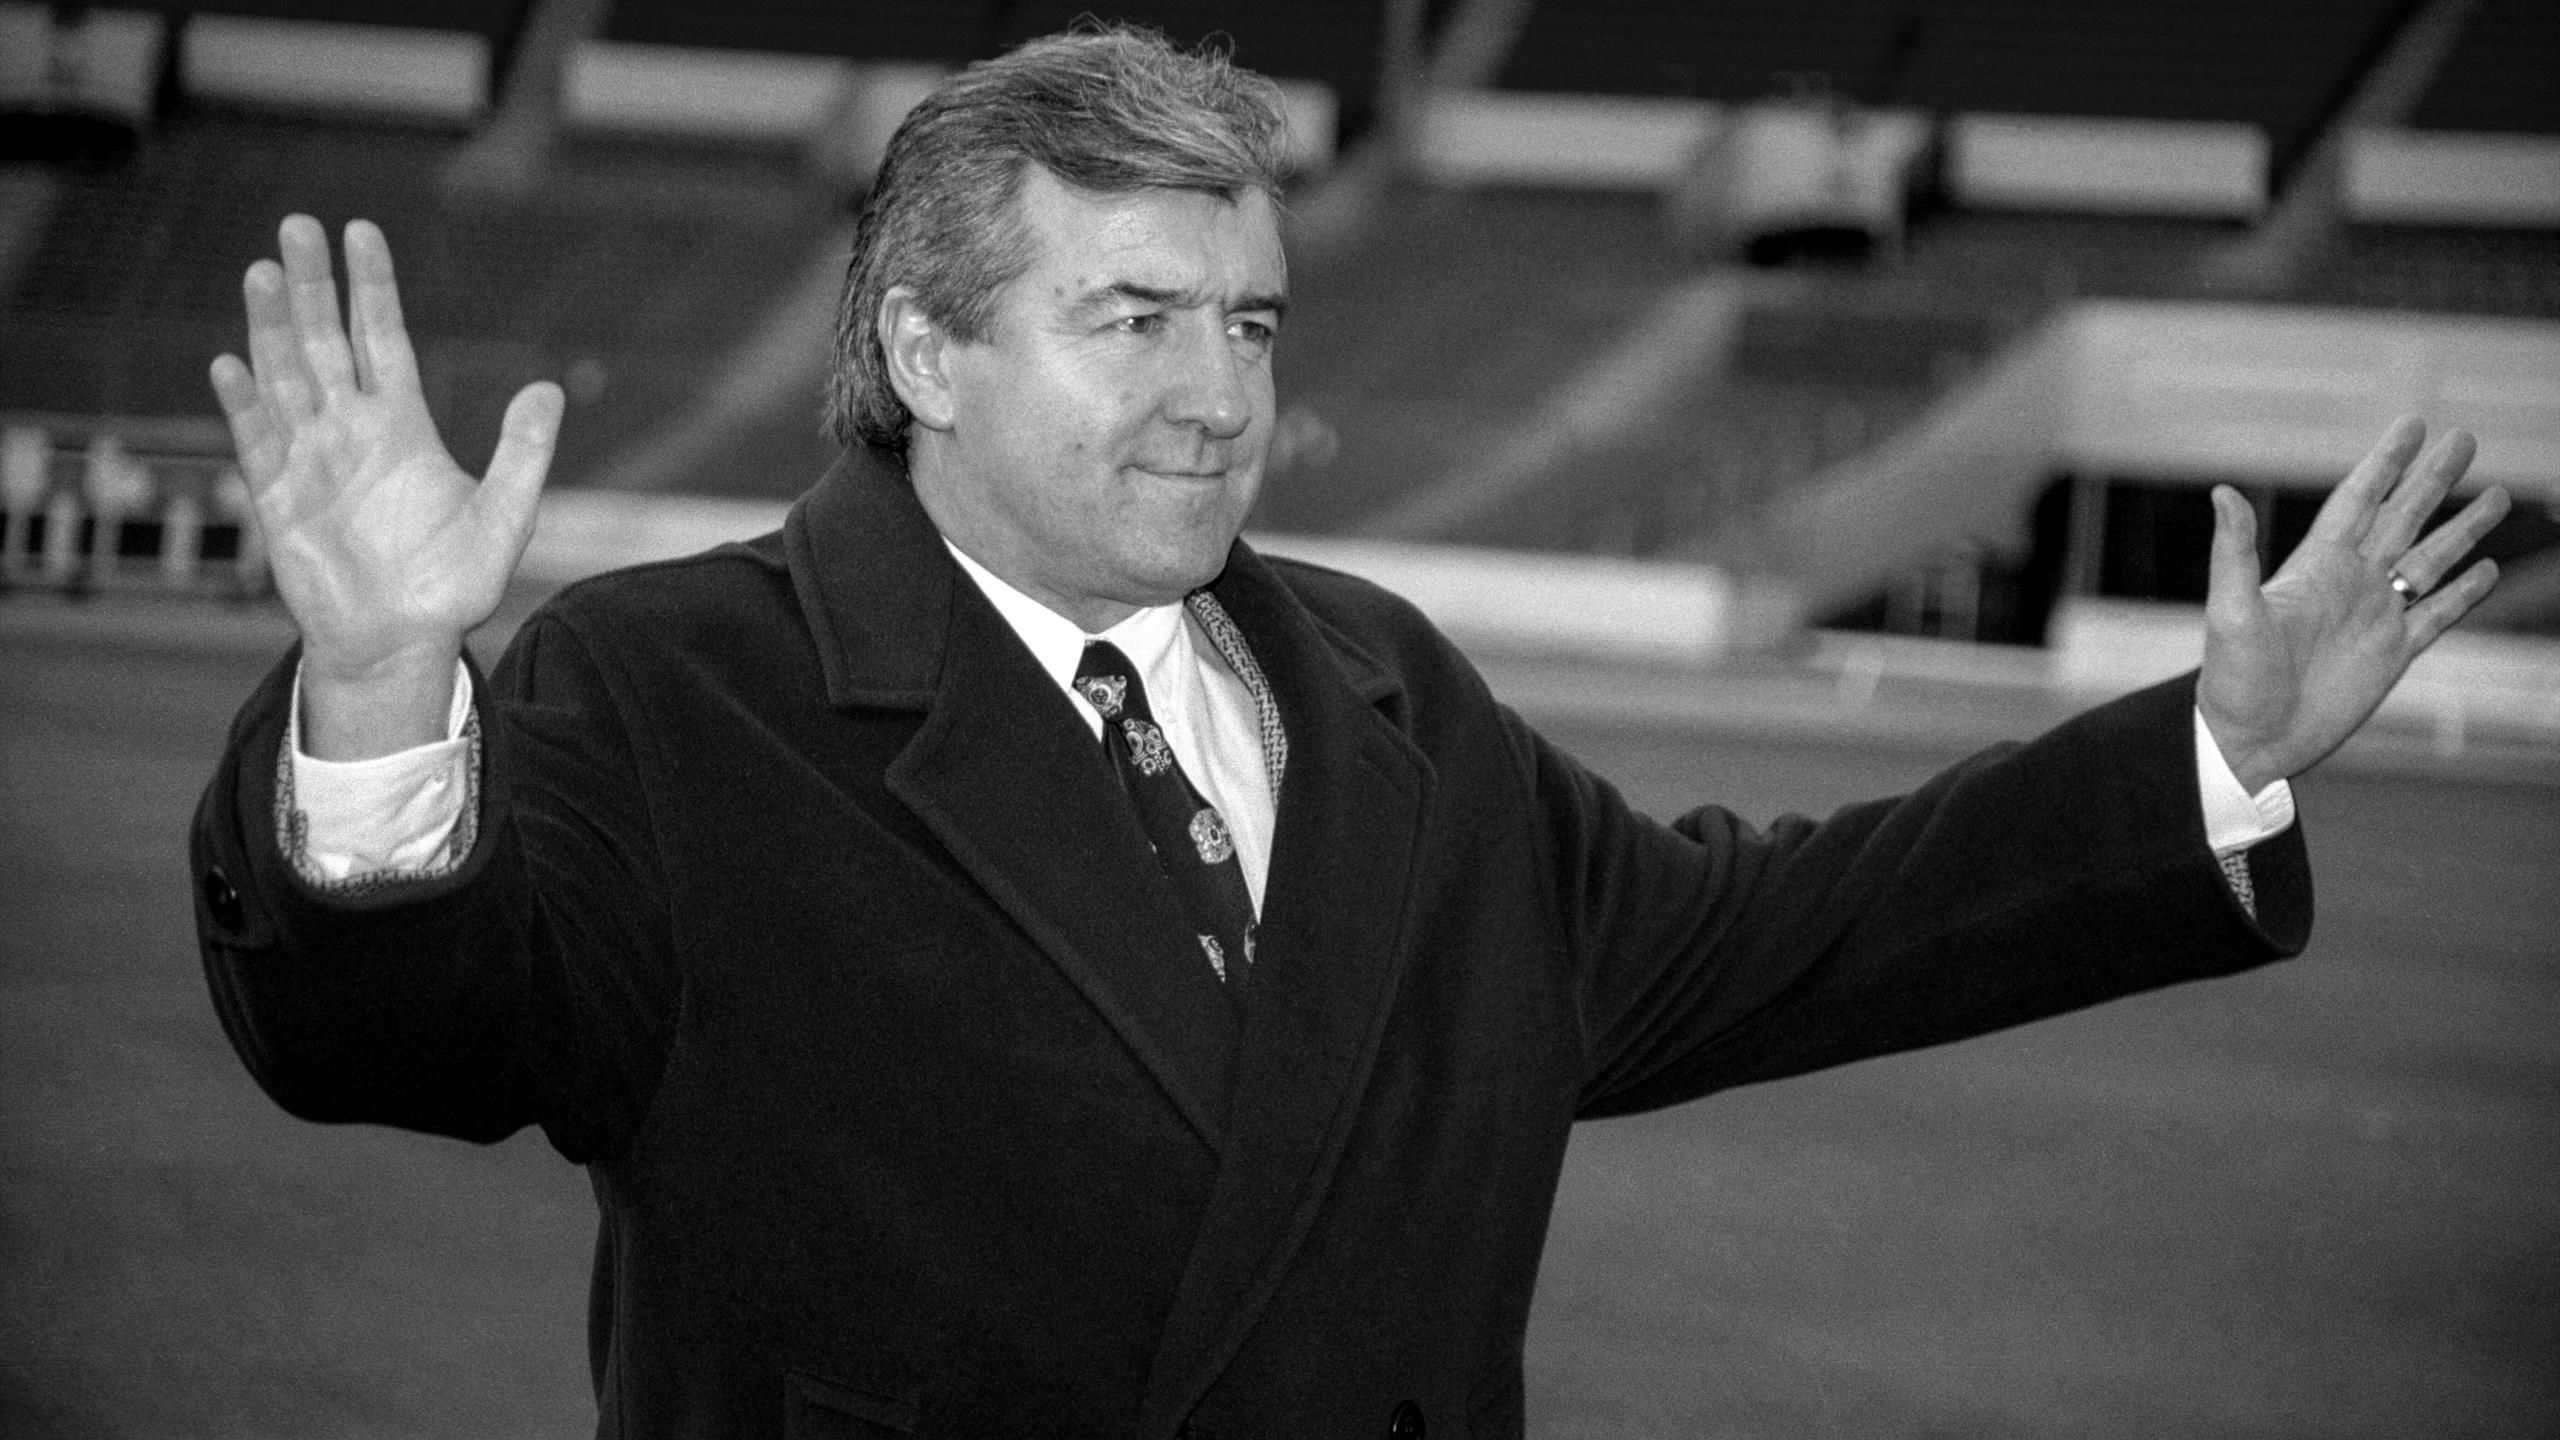 Former England manager Terry Venables has died